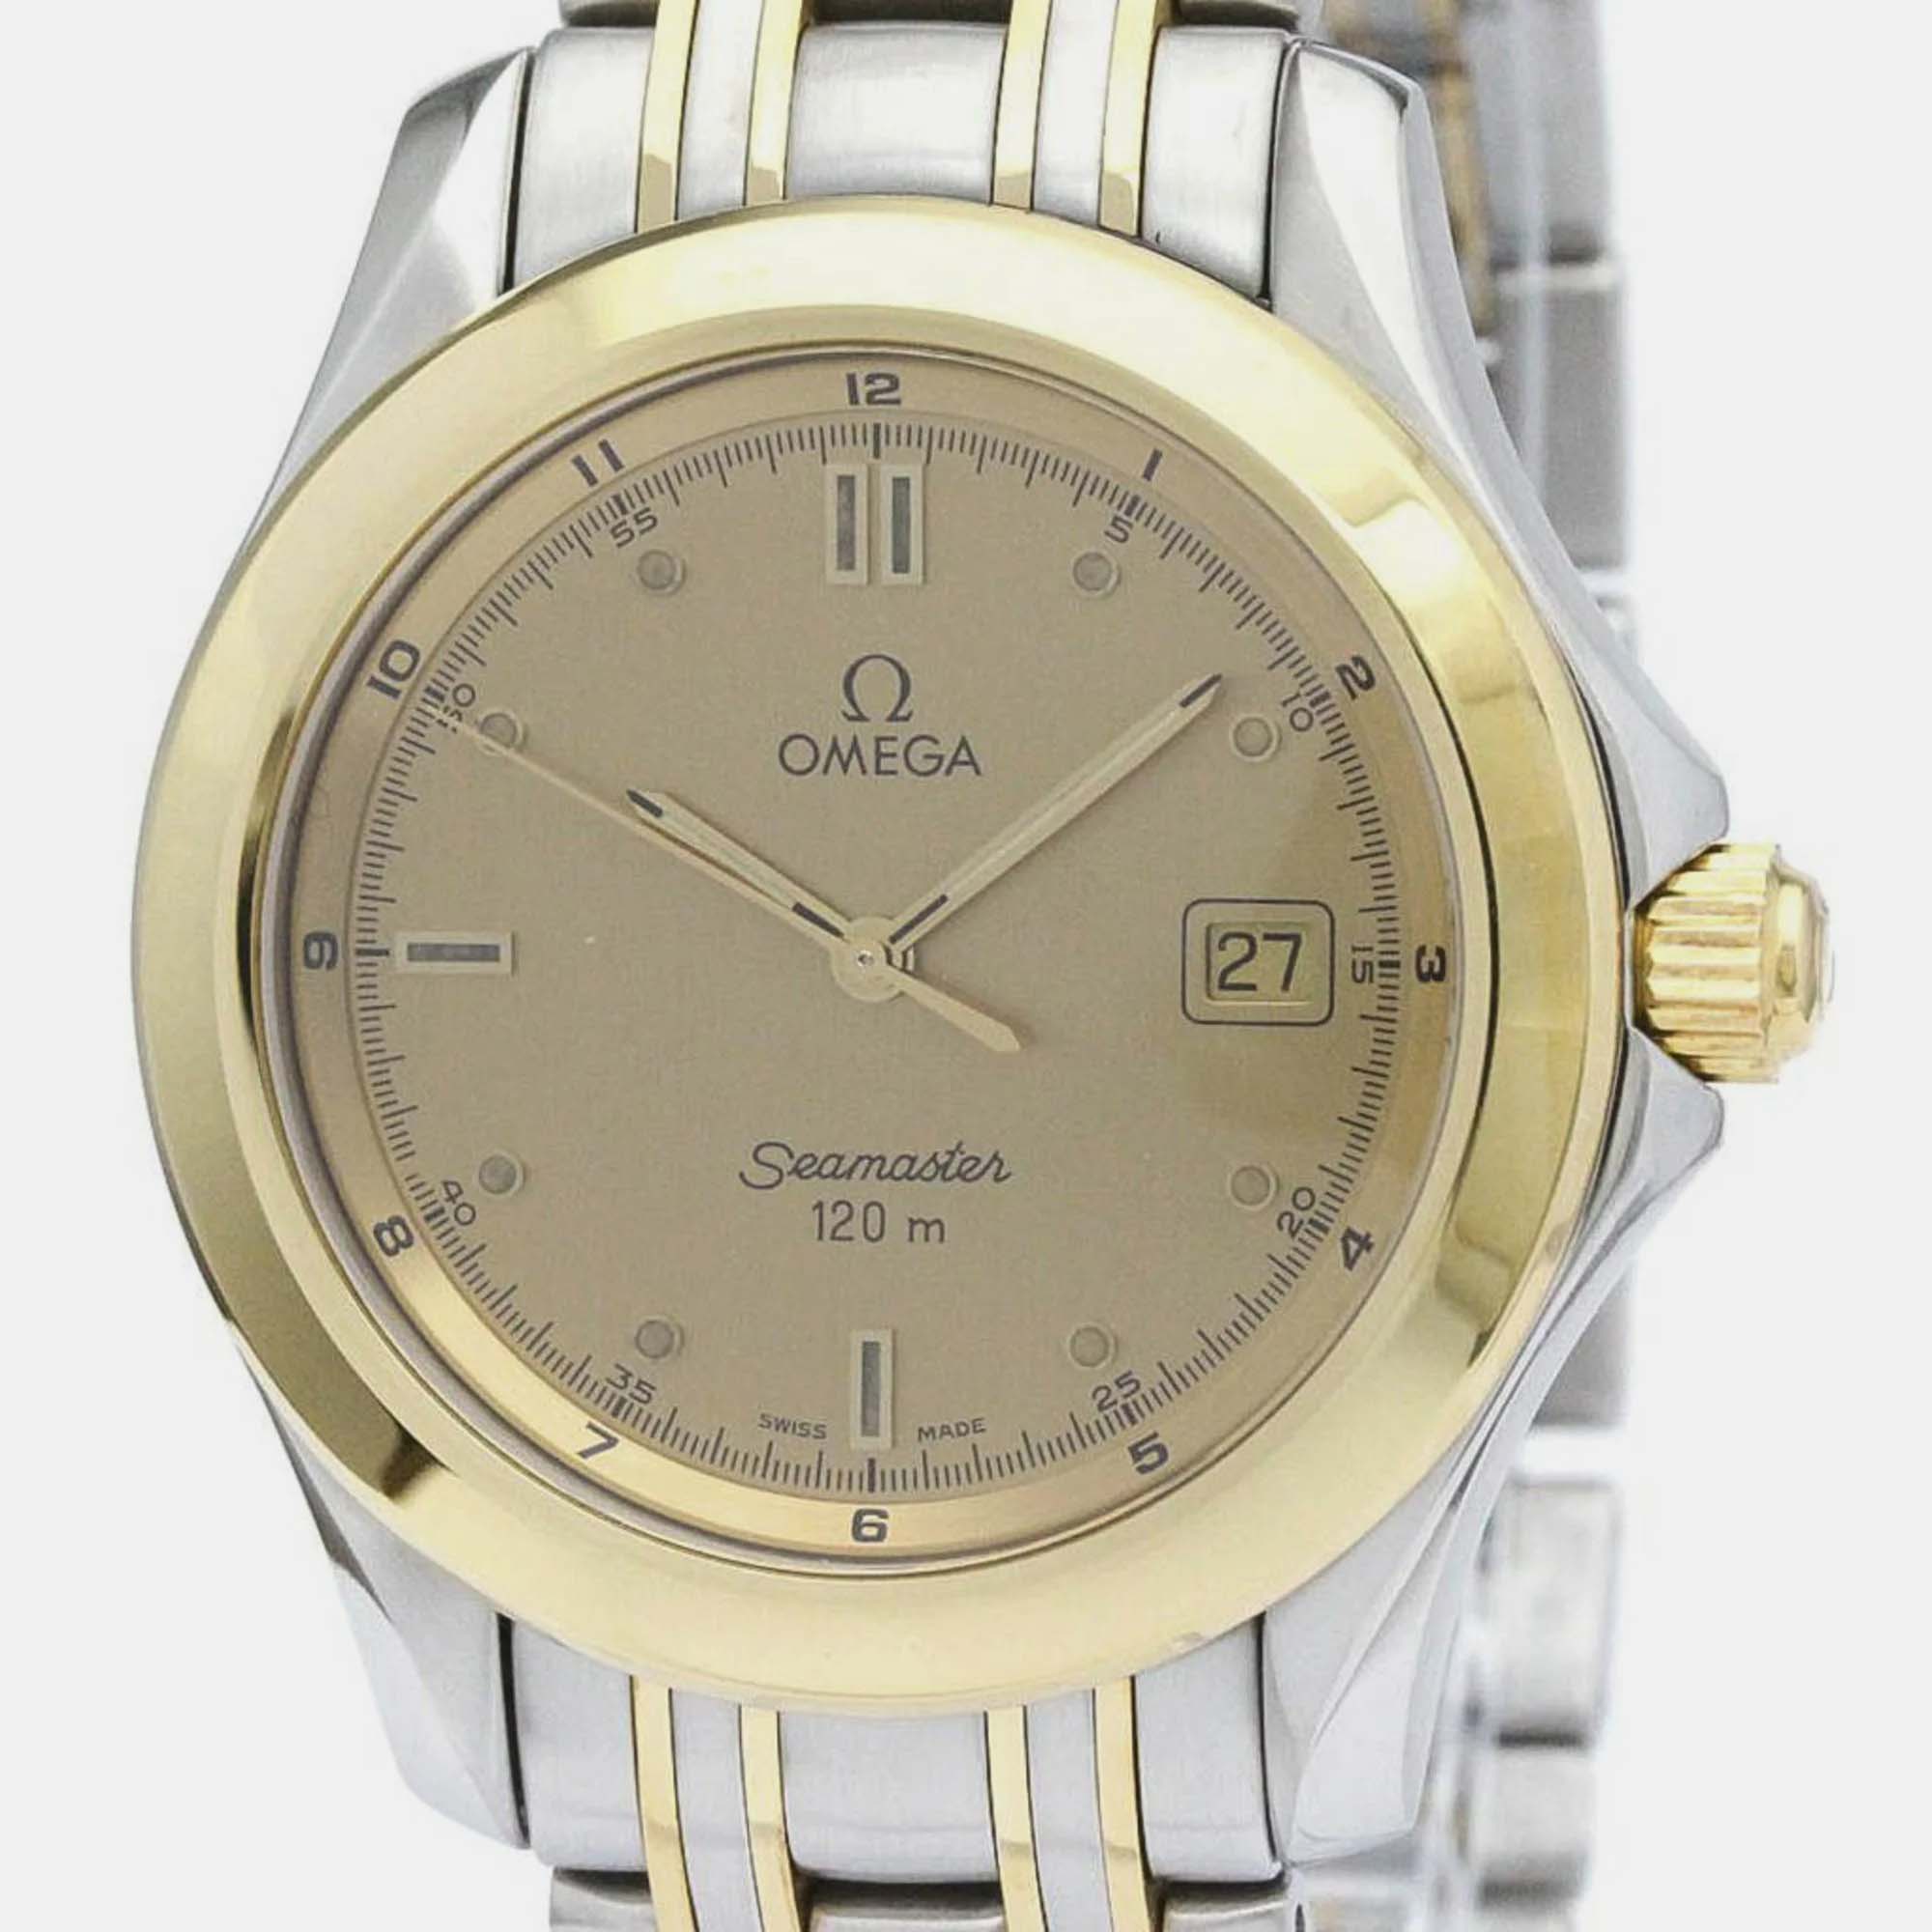 Omega Gold 18k Yellow Gold And Stainless Steel Seamaster 2311.11 Quartz Men's Wristwatch 36 Mm